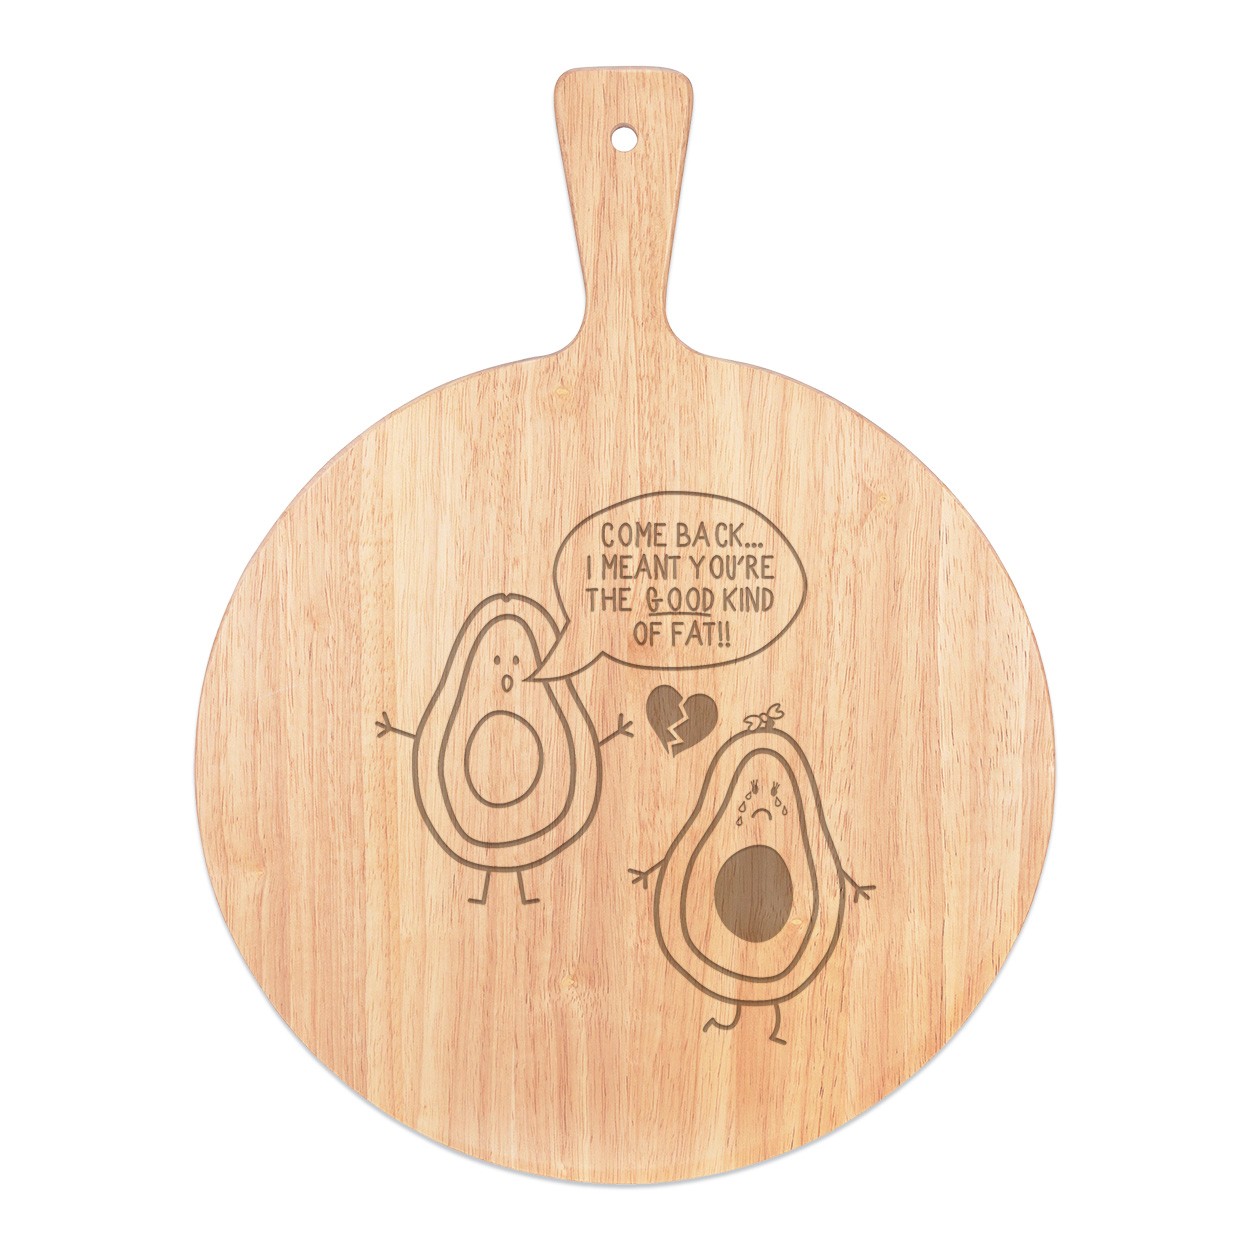 Avocado The Good Kind Of Fat Pizza Board Paddle Serving Tray Handle Round Wooden 45x34cm